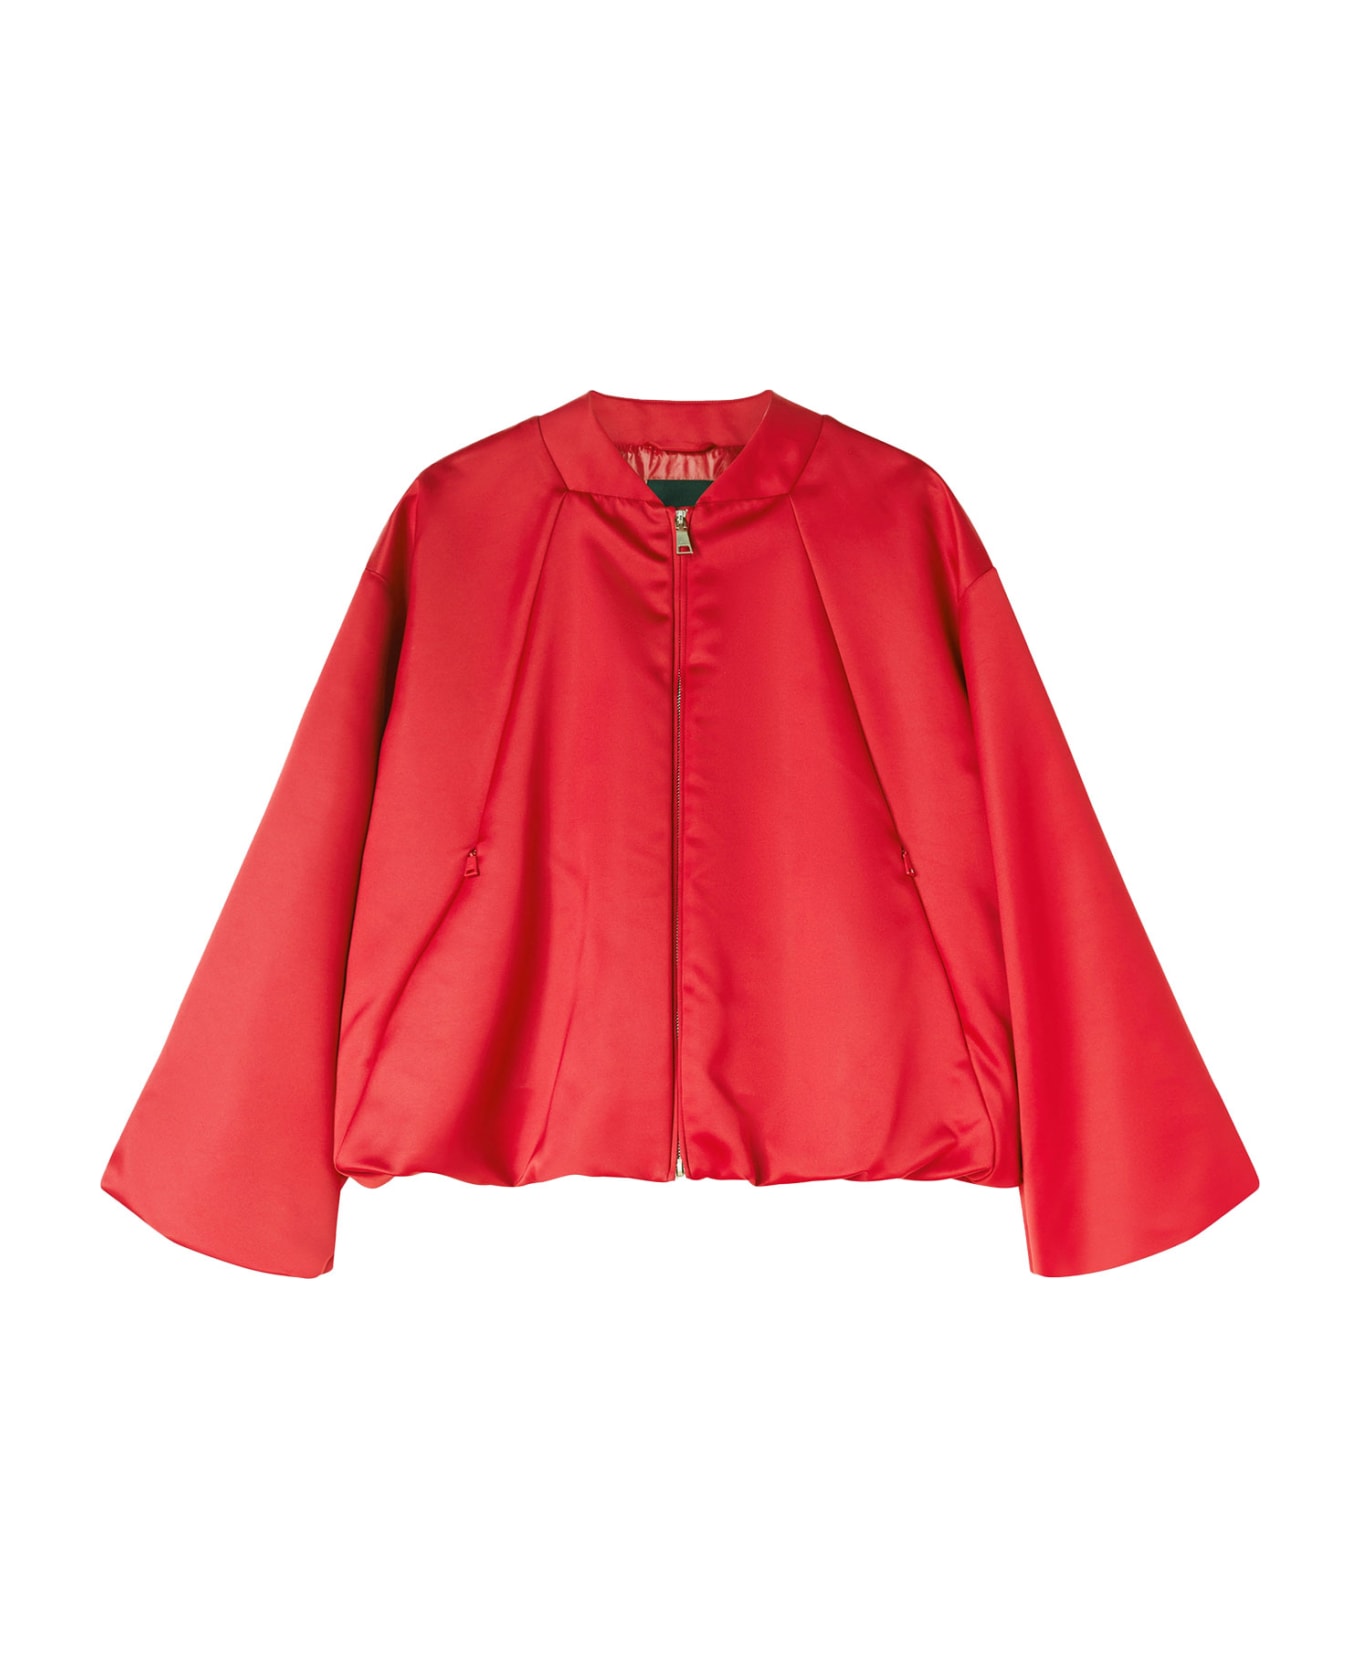 Add Red Satin Jacket With Zip - RED SALSA ブラウス